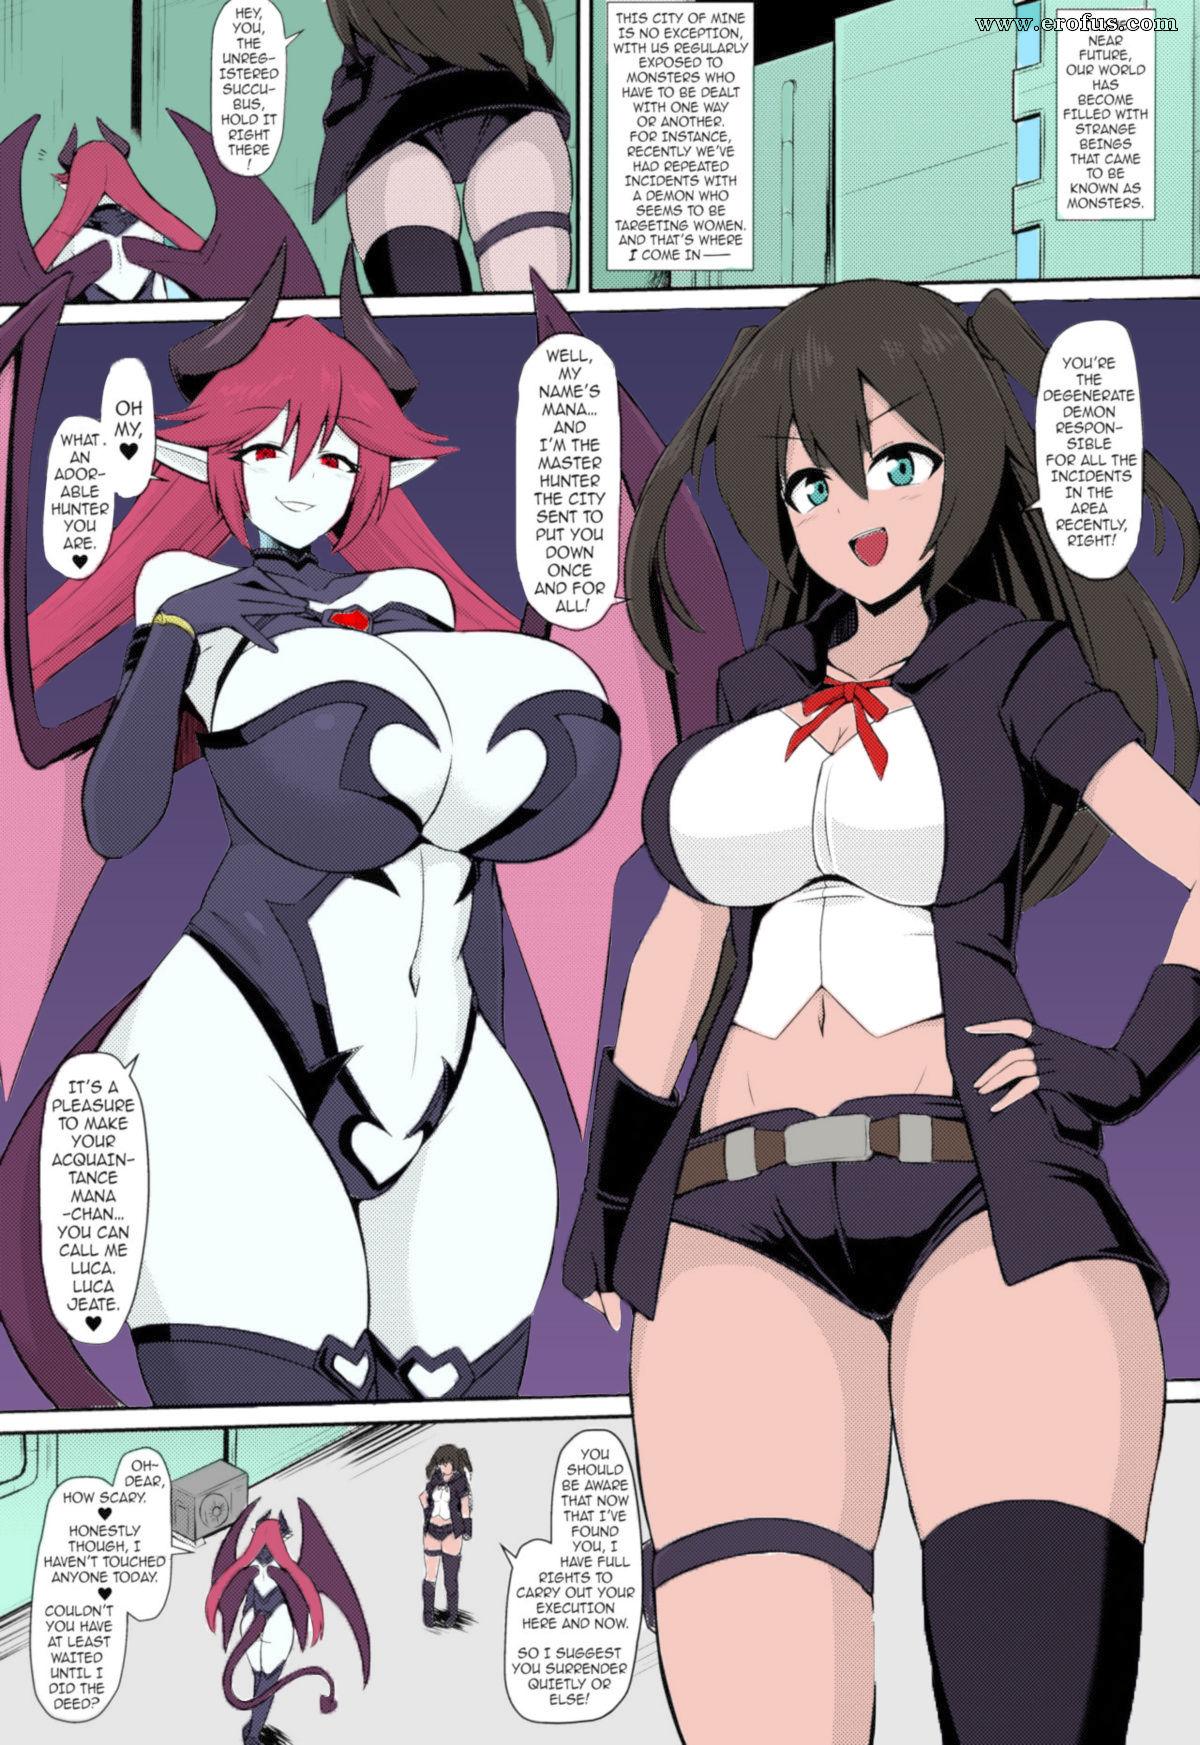 Heels A Lesbian Succubu´s Lust Crest Pleasure Training - COLOR- Ongoing Gay Physicals - Page 2